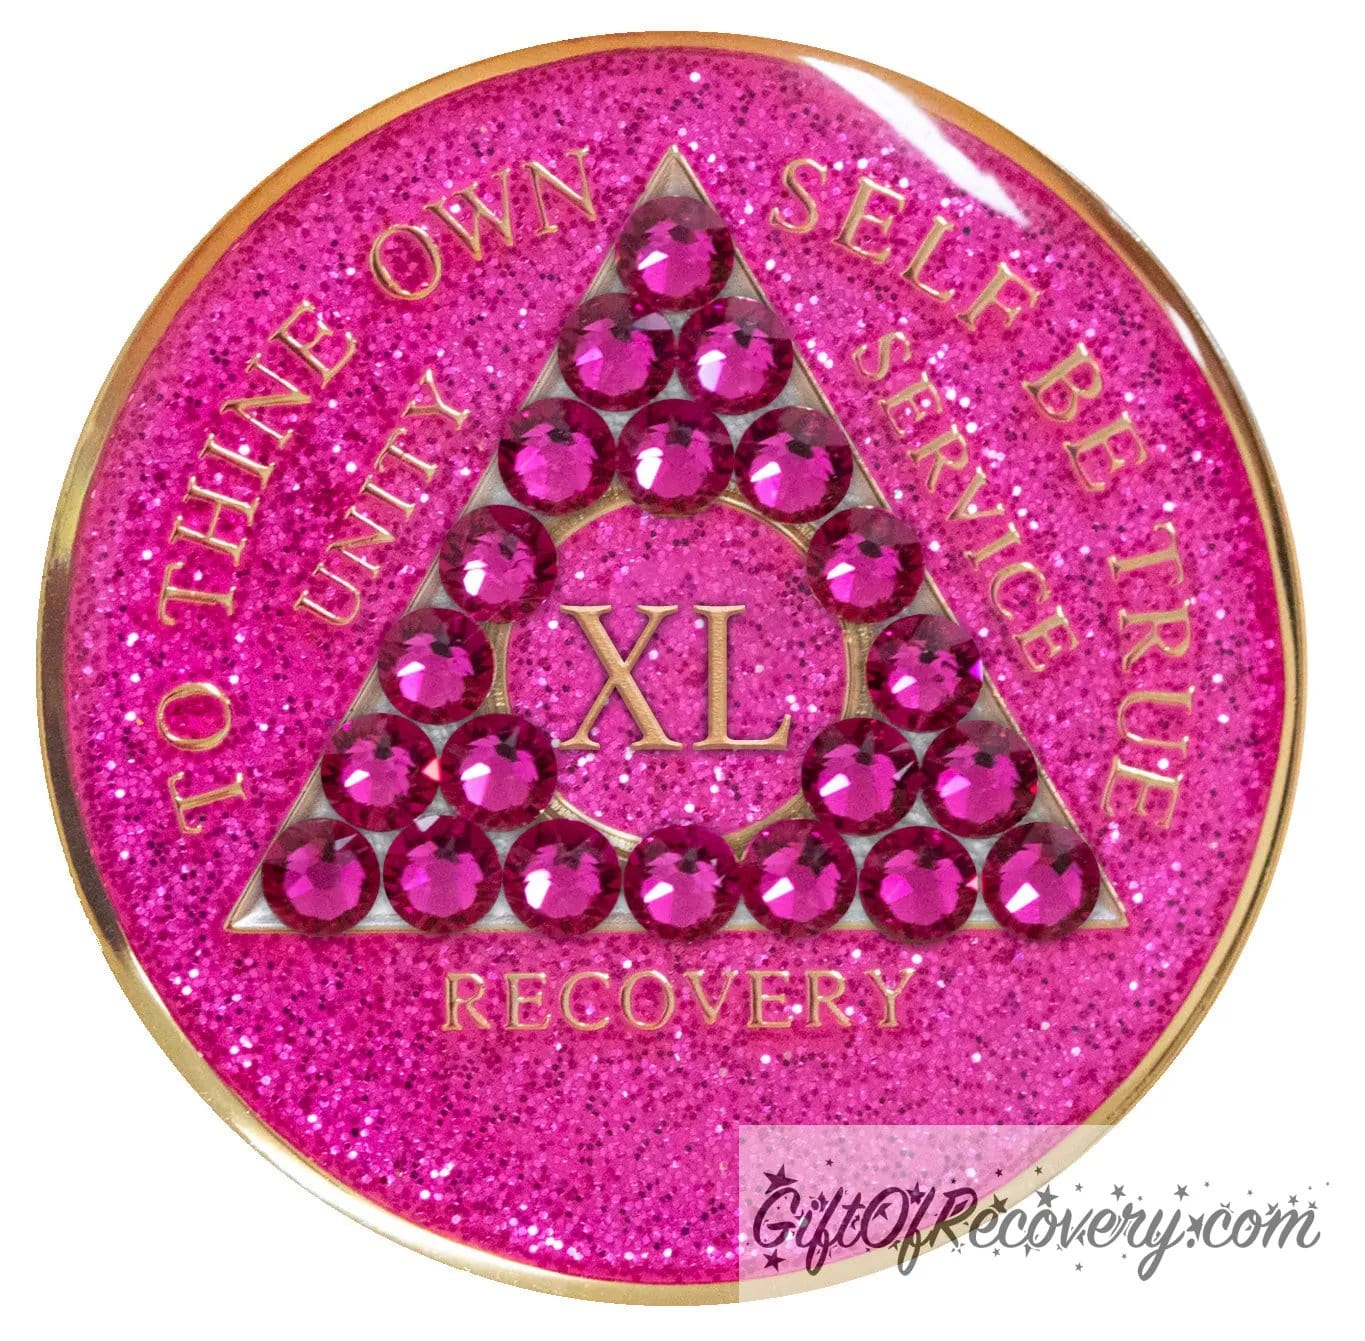 40 year Princess Pink Glitter AA medallion with 21 genuine fuchsia crystals in the shape of a triangle in the center of the recovery medallion, for your favorite sober princess, and to thine own self be true, unity, service, recovery, the roman numeral in the middle, and the outer rim, embossed in 14k plated brass, the aa medallion is sealed in resin for a shiny finish.